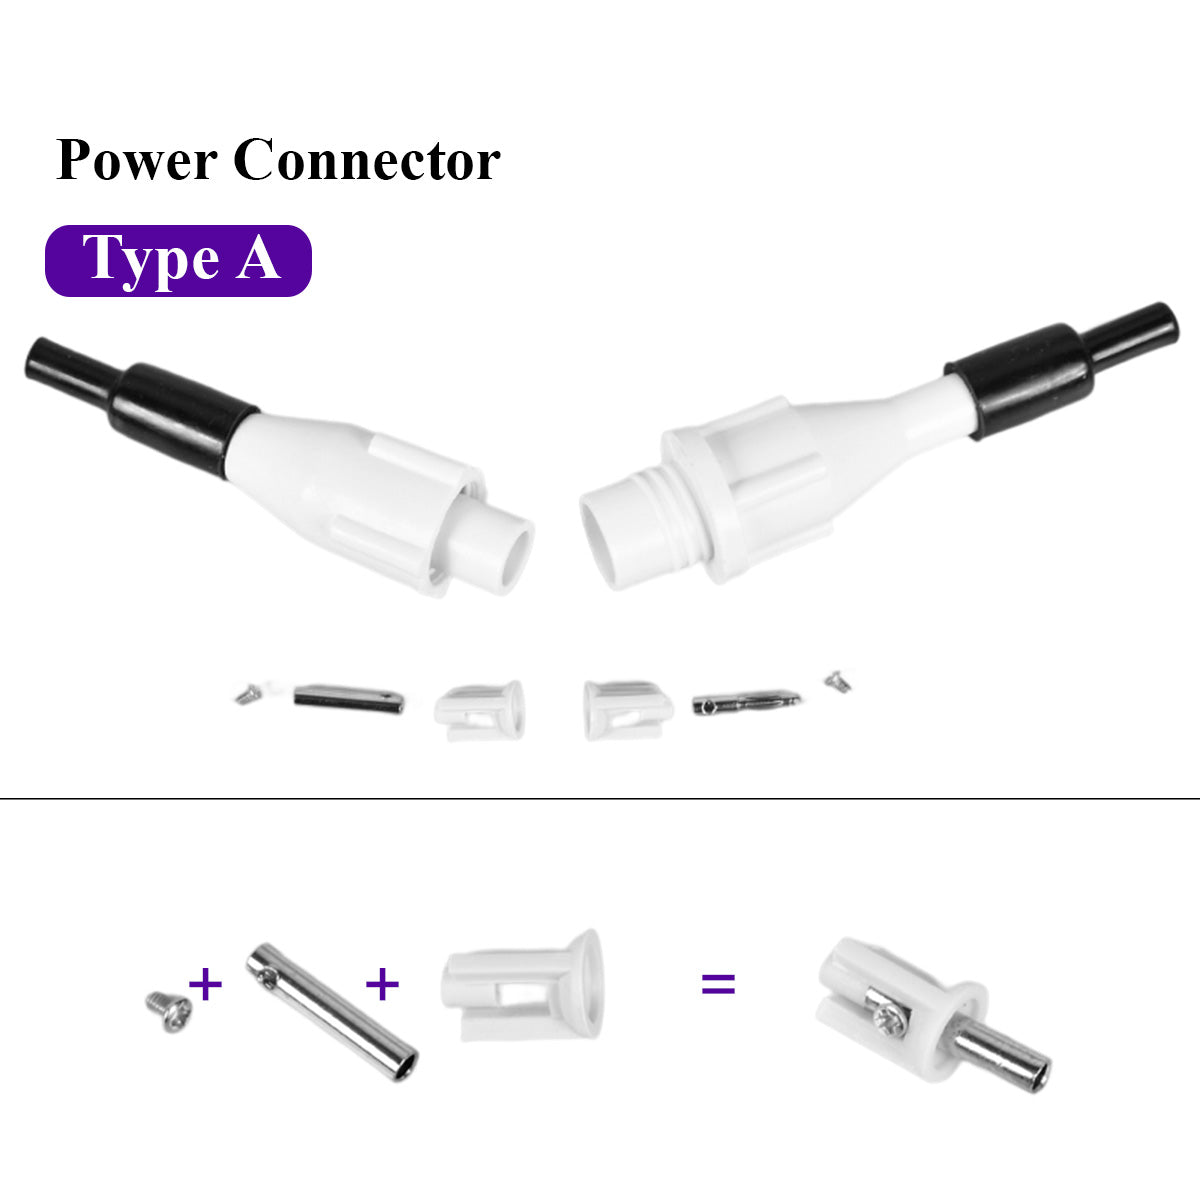 Startnow Laser Power Supply Connector Wire Adapter High Voltage Plug Socket For CO2 Laser Tube Cutting Engraving Machine Parts